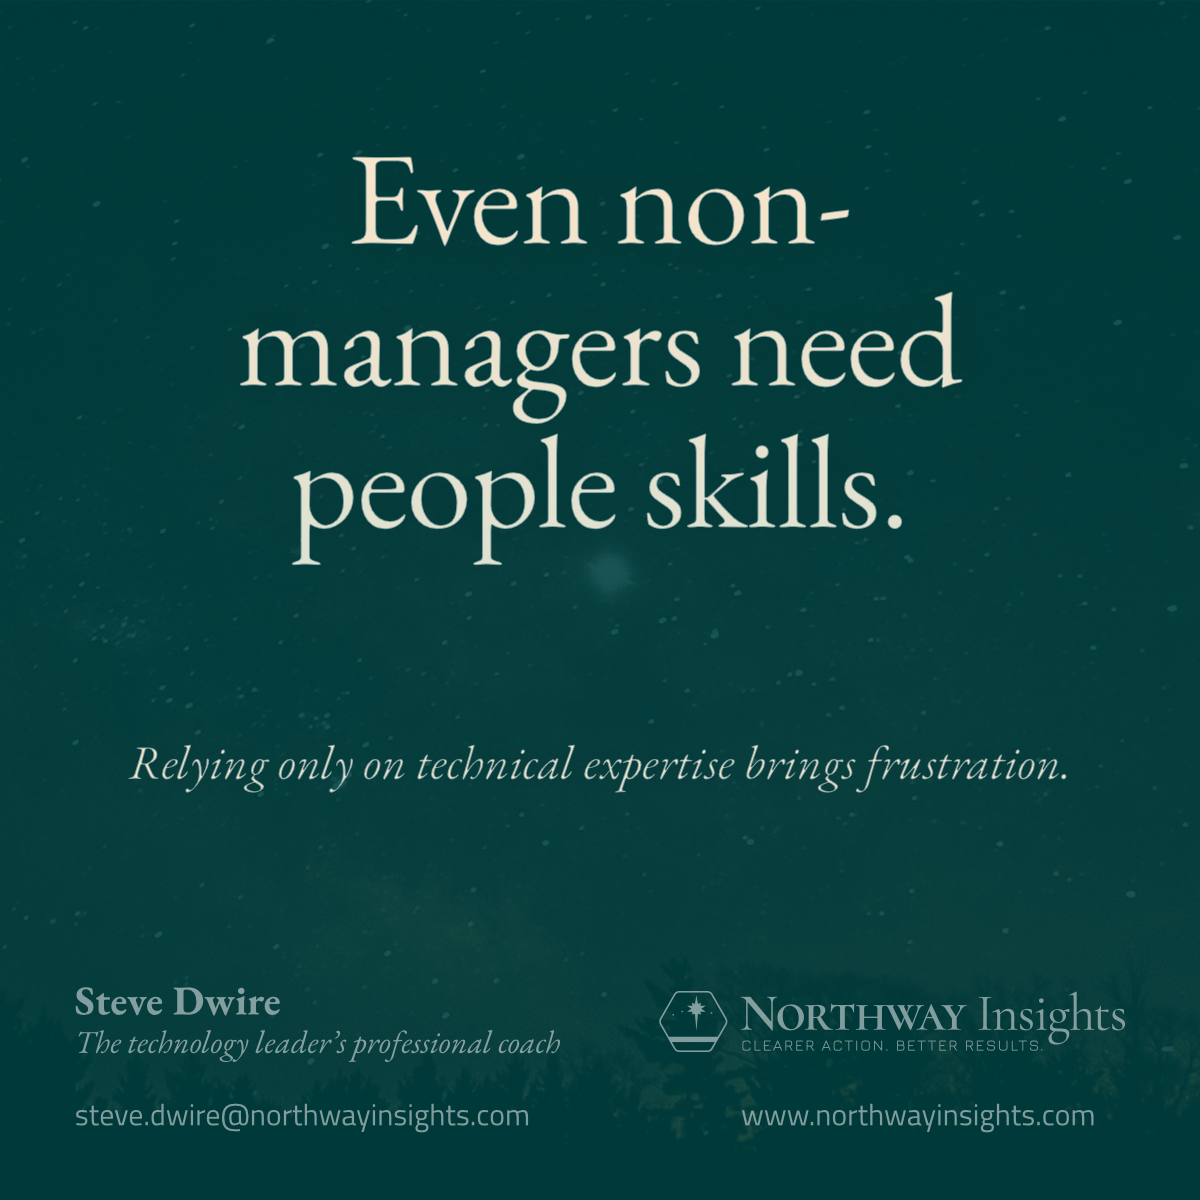 Even non-managers need people skills. (Relying only on technical expertise brings frustration.)